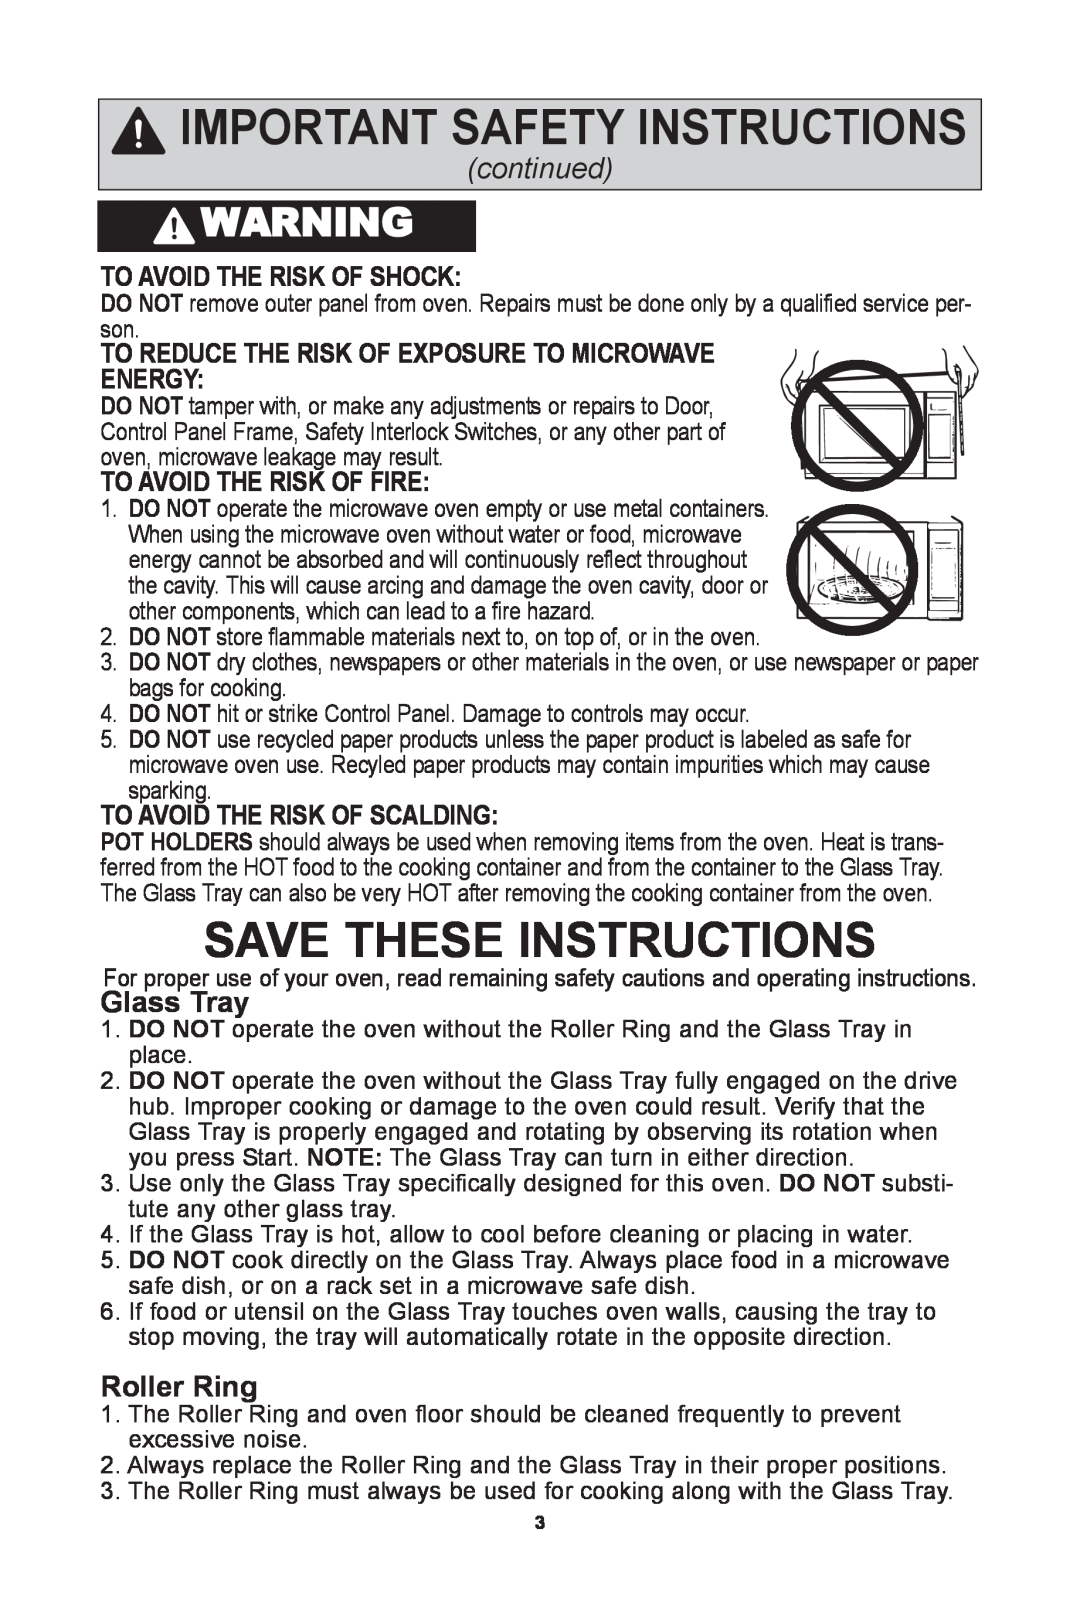 Panasonic NN-SD372S SaVe TheSe InSTrucTIonS, roller ring, To aVoID The rISK of ShocK, To aVoID The rISK of fIre, continued 